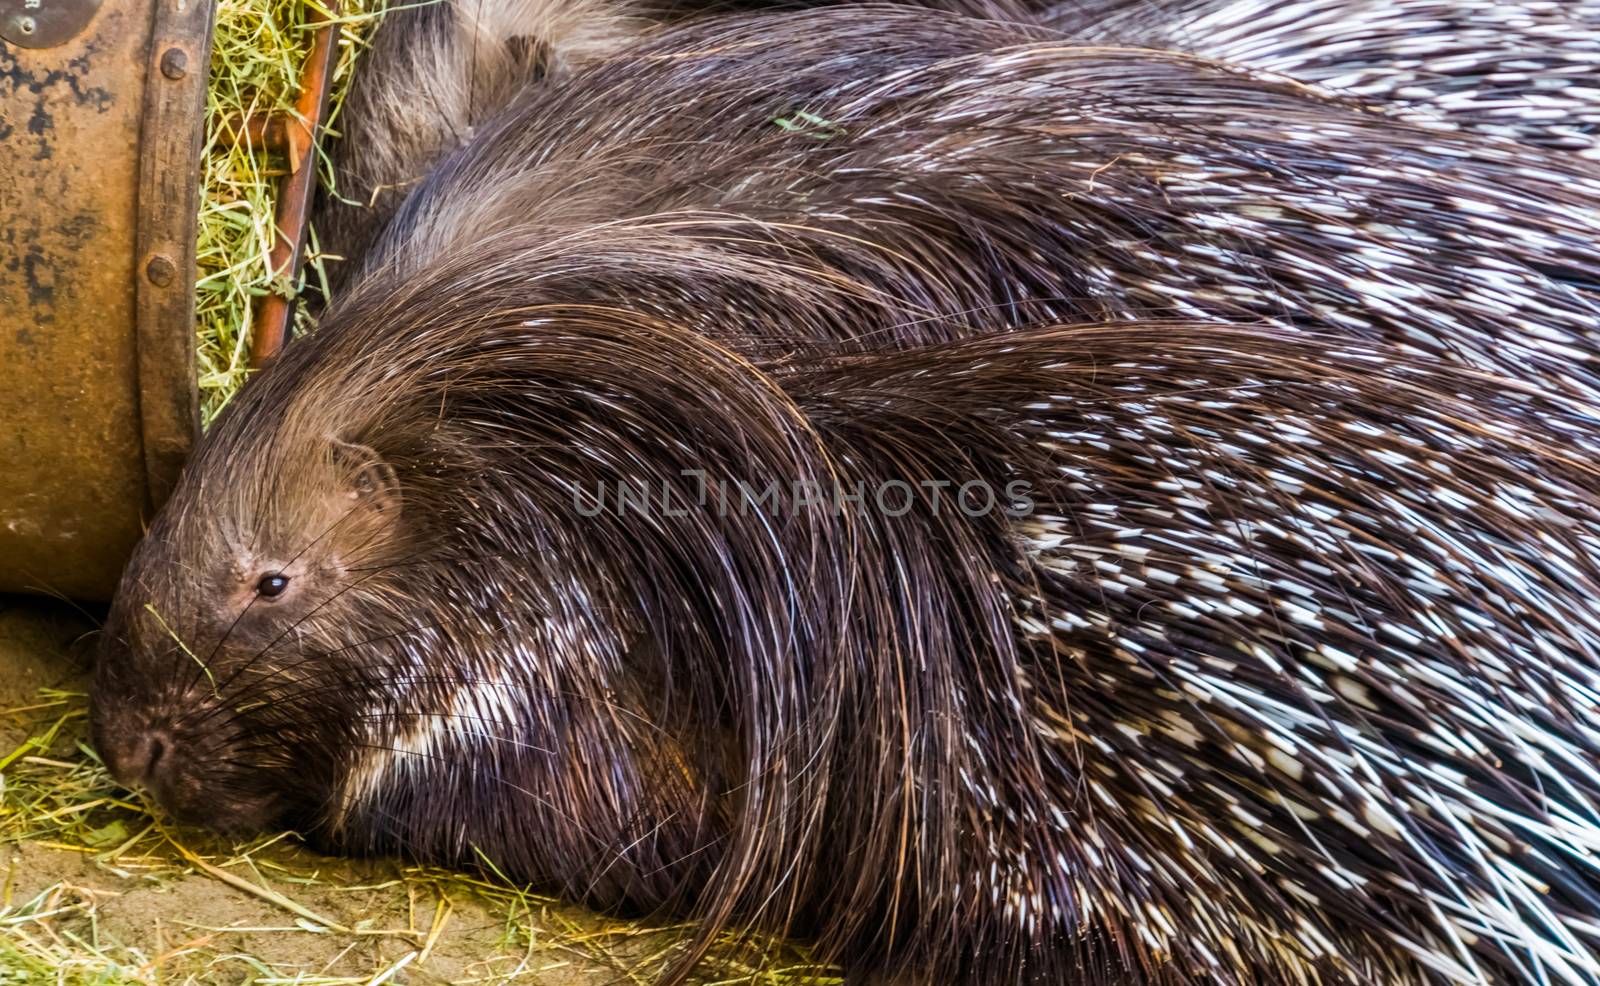 the face of a indian crested porcupine in closeup, popular tropical animal specie from Asia by charlottebleijenberg